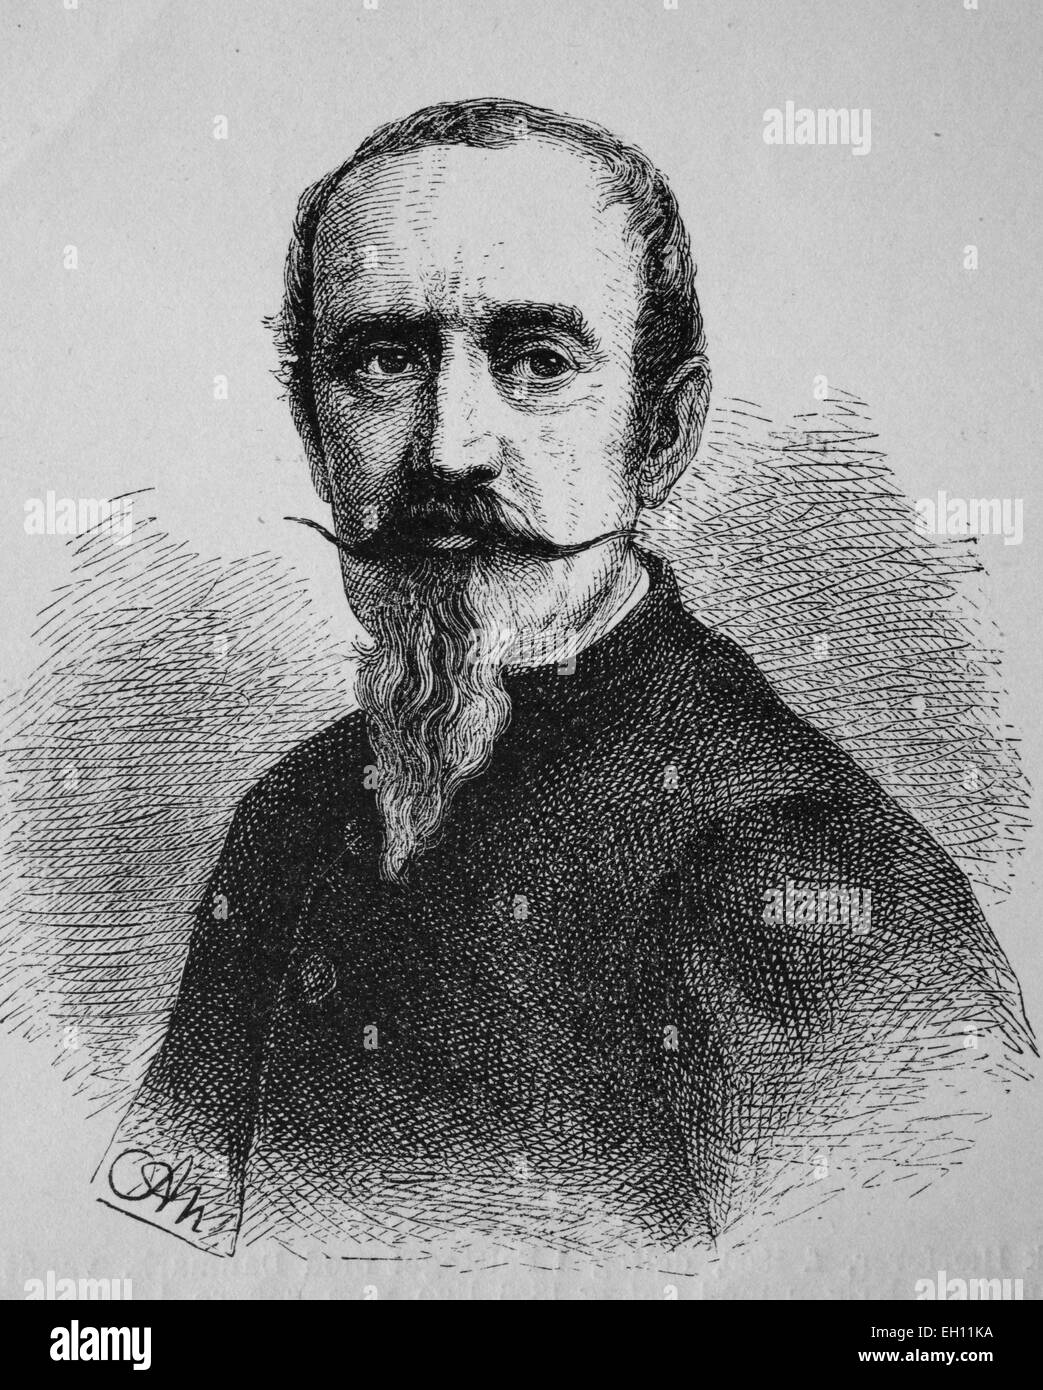 Horace Vernet, painter and lithographer, 1789 - 1863, historical woodcut, circa 1880 Stock Photo